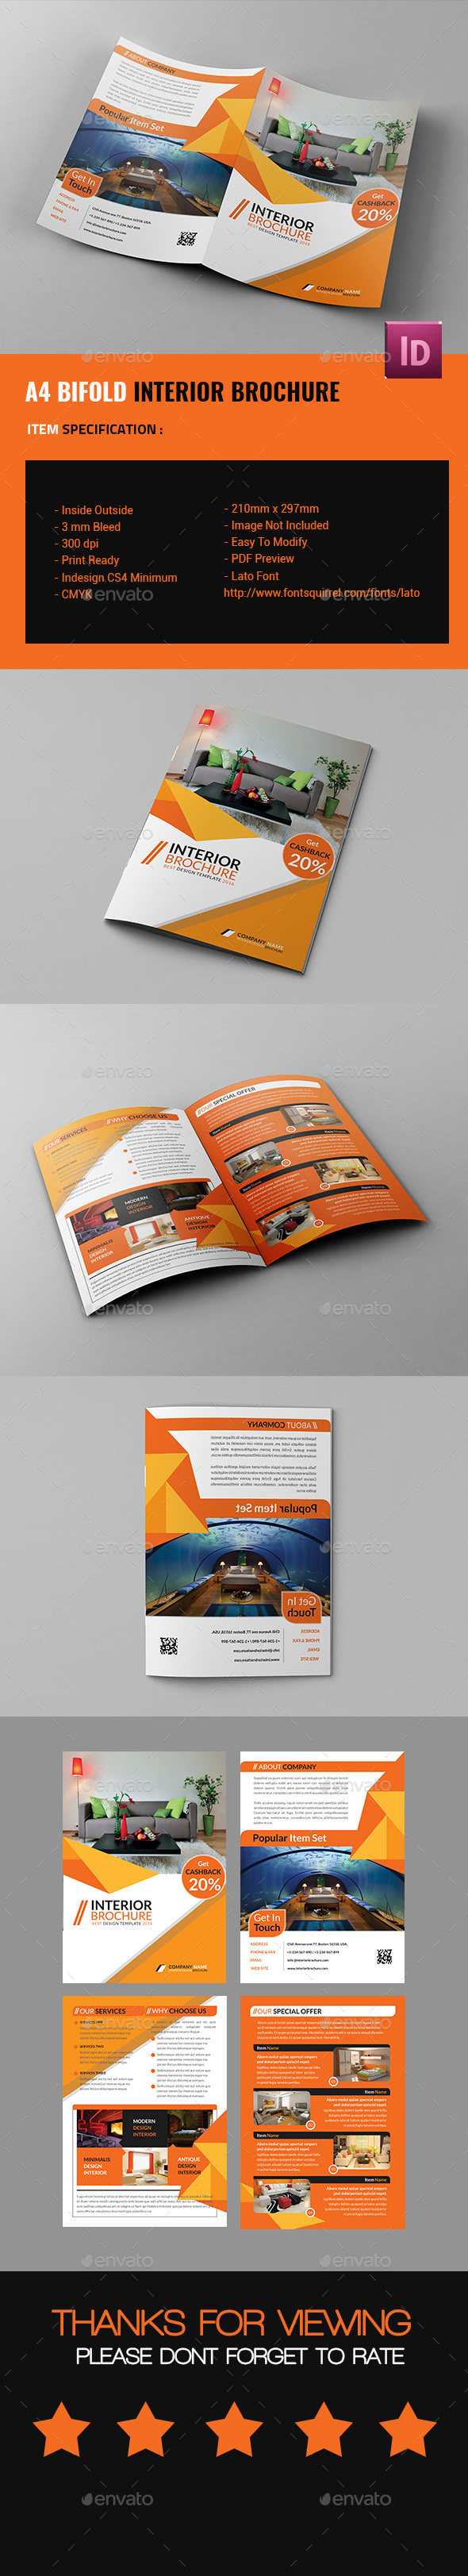 Bifold And Marketing Corporate Brochure Templates Page 4